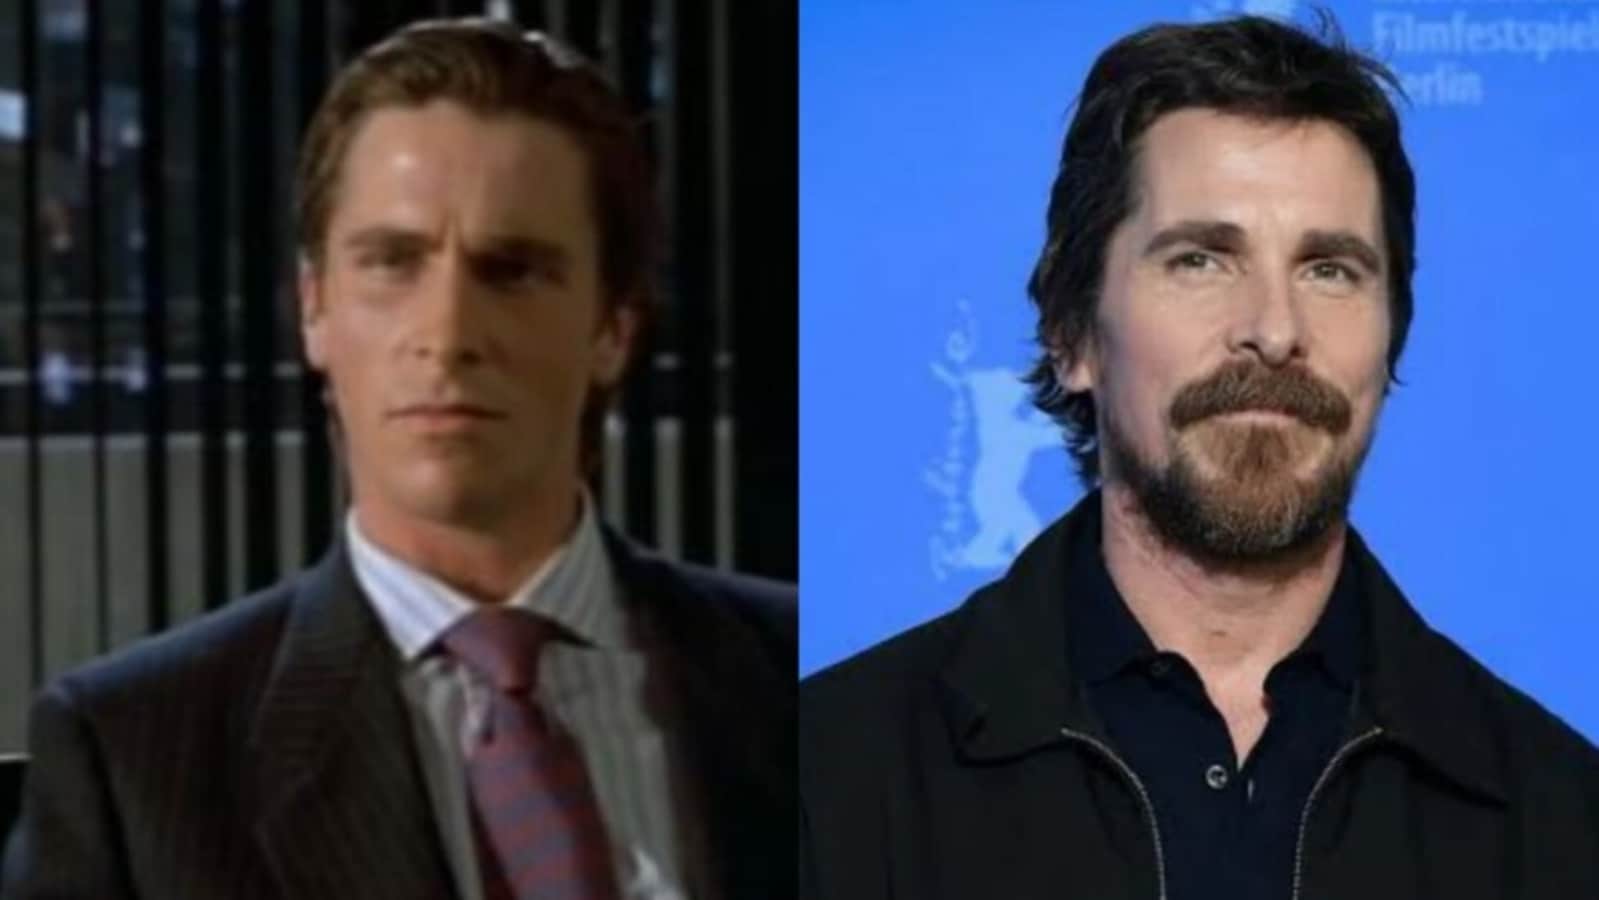 Christian Bale reveals being paid less than his make-up artists for American Psycho: ‘They were laughing at me’